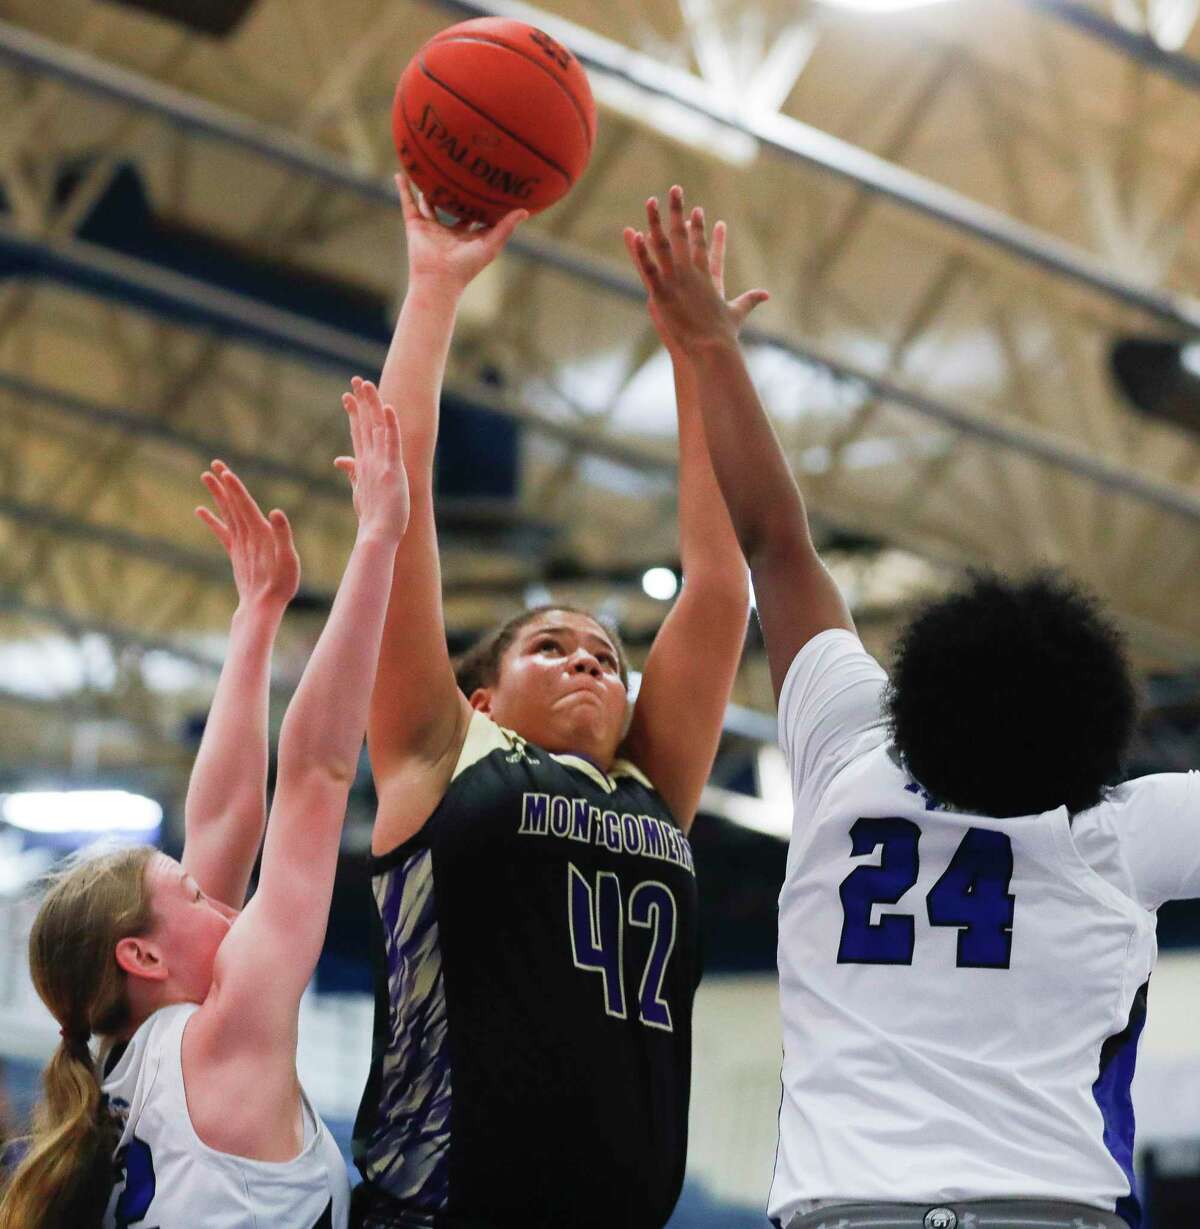 Montgomery forward Janessa Tennison (42) shoots a contested shot during the first quarter of a high school basketball game at New Caney High School, Friday, Dec. 17, 2021, in New Caney.